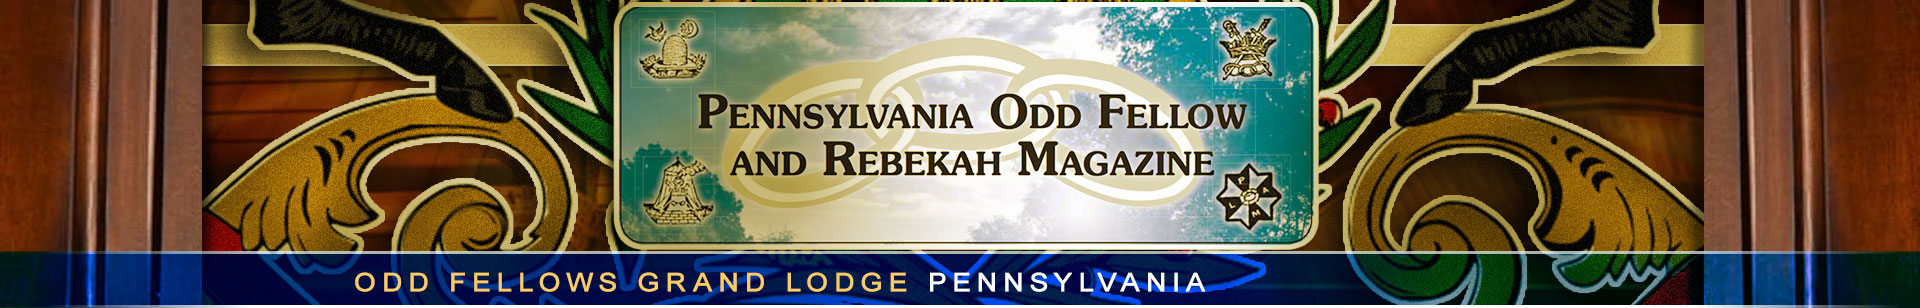 This Magazine is Published in the City of Middletown PA monthly. Published by 
THE GRAND LODGE OF PENNSYLVANIA INDEPENDENT ORDER
OF ODD FELLOWS